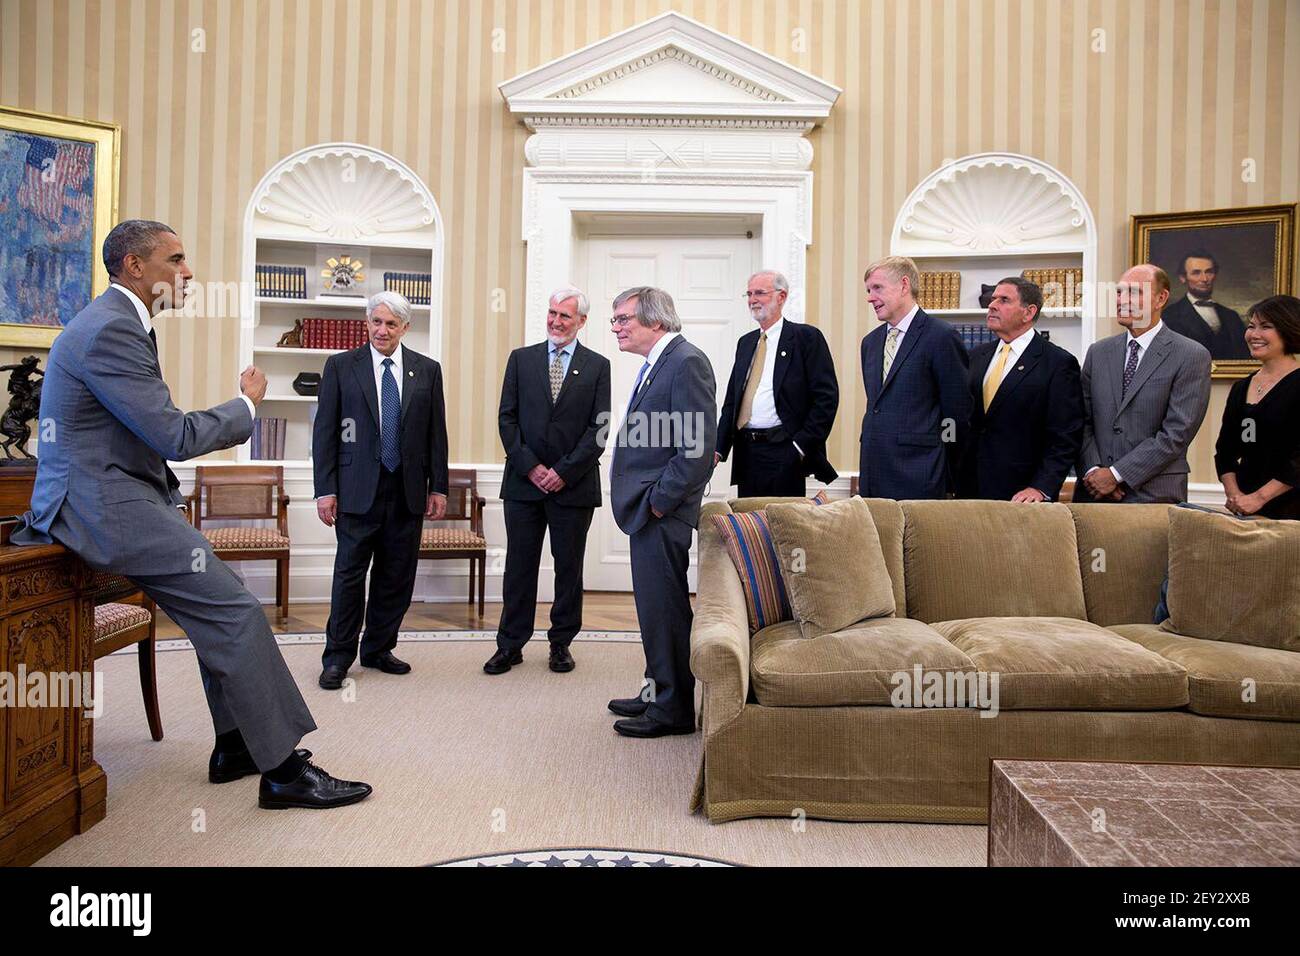 President Barack Obama greets four of the nine 2014 Kavli Prize laureates with representatives from the Kavli Foundation and other guests in the Oval Office, July 31, 2014. The 2014 Kavli Prize laureates were selected for making fundamental contributions to the theory of cosmic inflation, to our understanding of the resolution limits of optical microscopy, and for the discovery of specialized brain networks for memory and cognition. (Photo by Pete Souza/White House/Sipa USA) This official White House photograph is being made available only for publication by news organizations and/or for perso Stock Photo